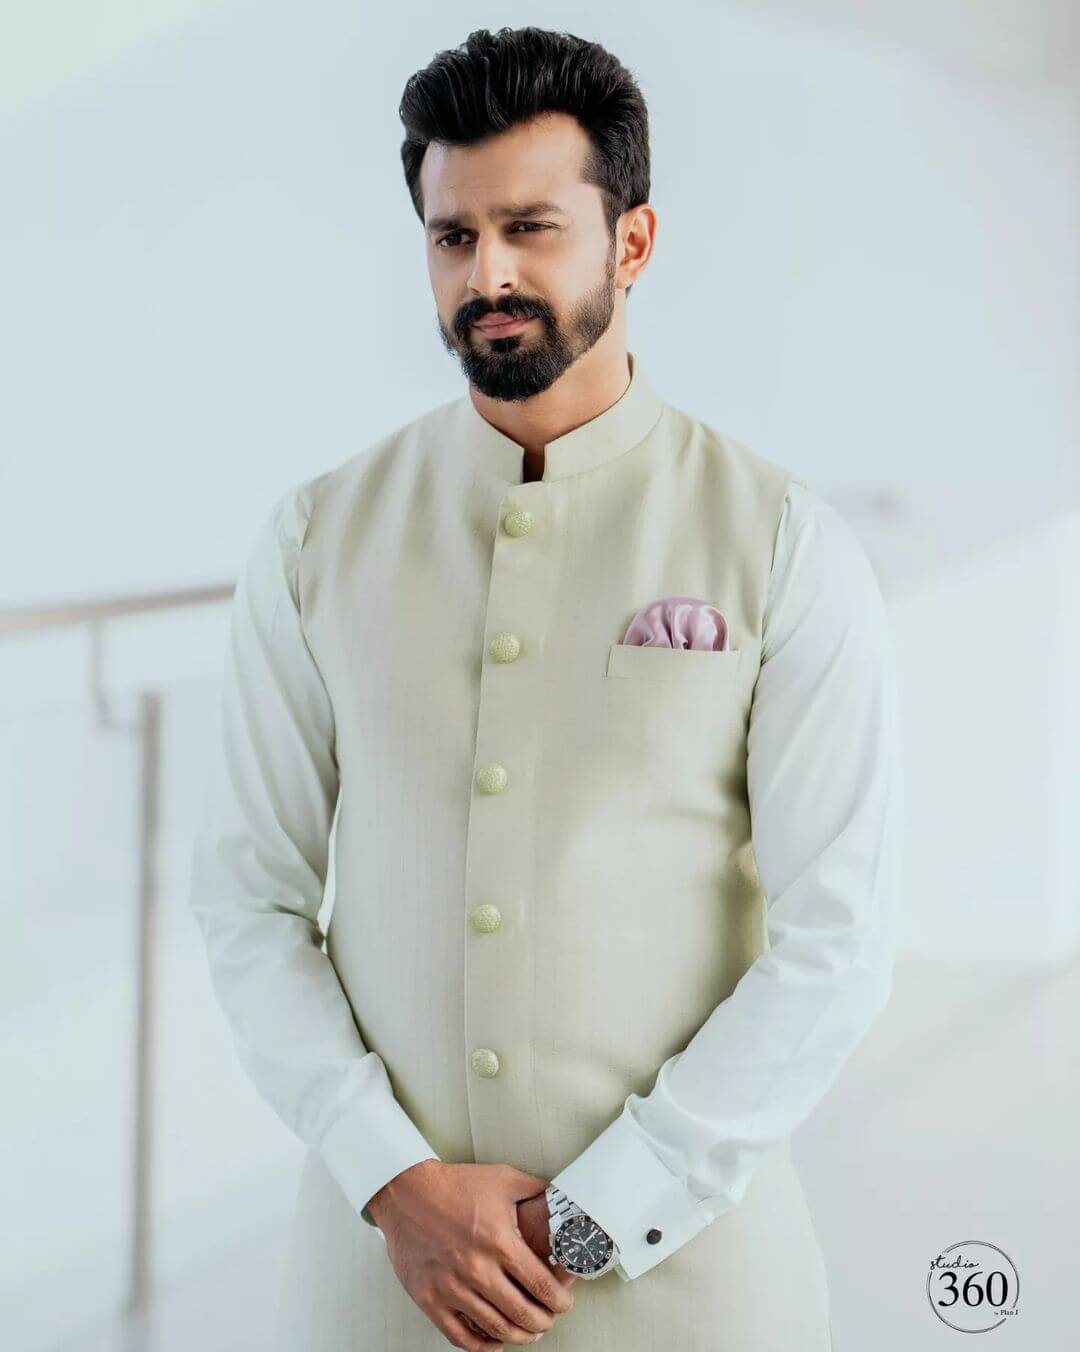 Actor Shaheen Sidhique in stylish white outfit